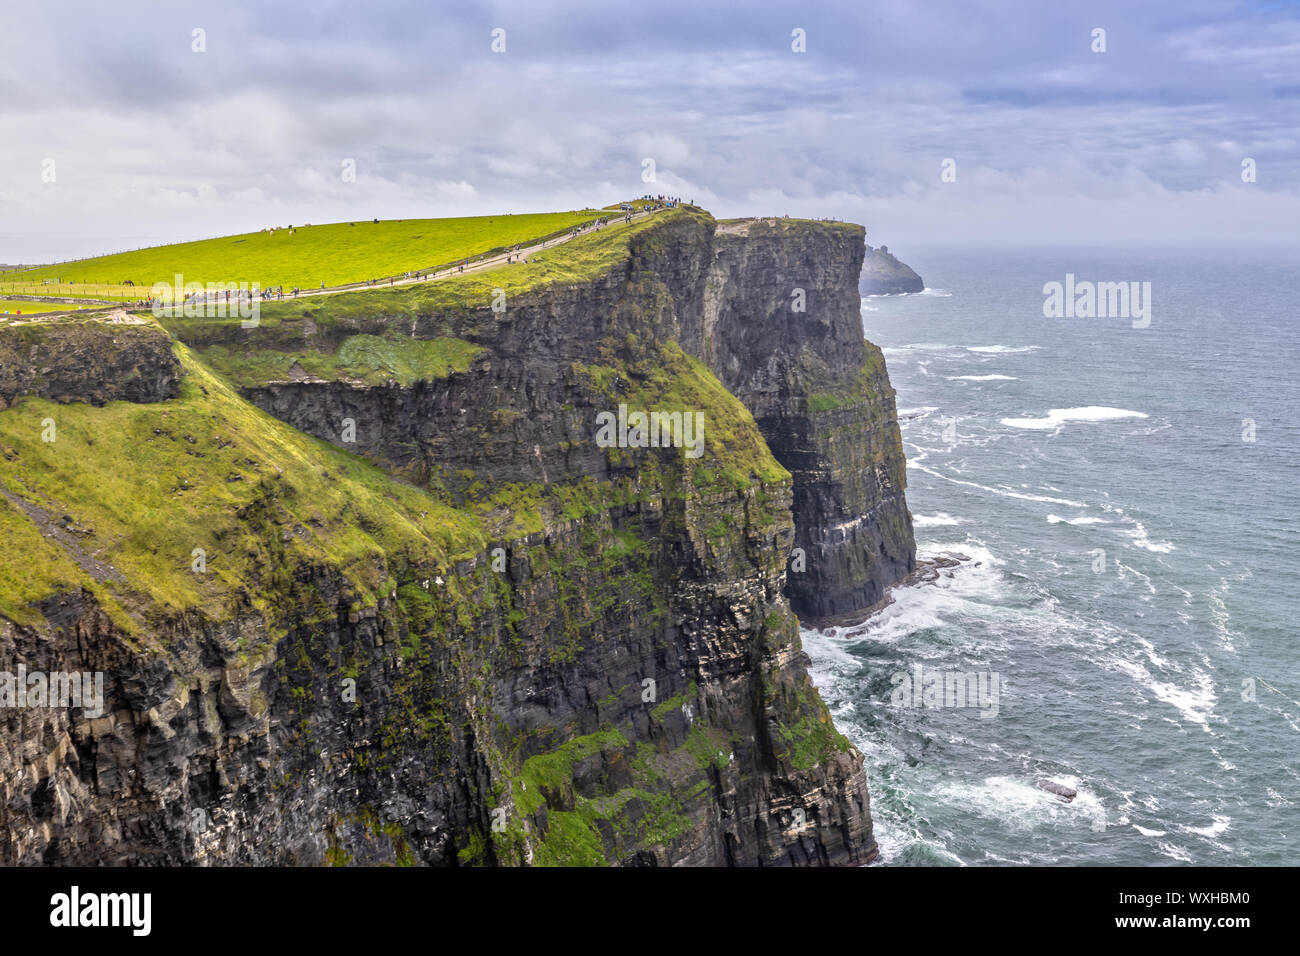 The Cliffs of Moher in Ireland Stock Photo